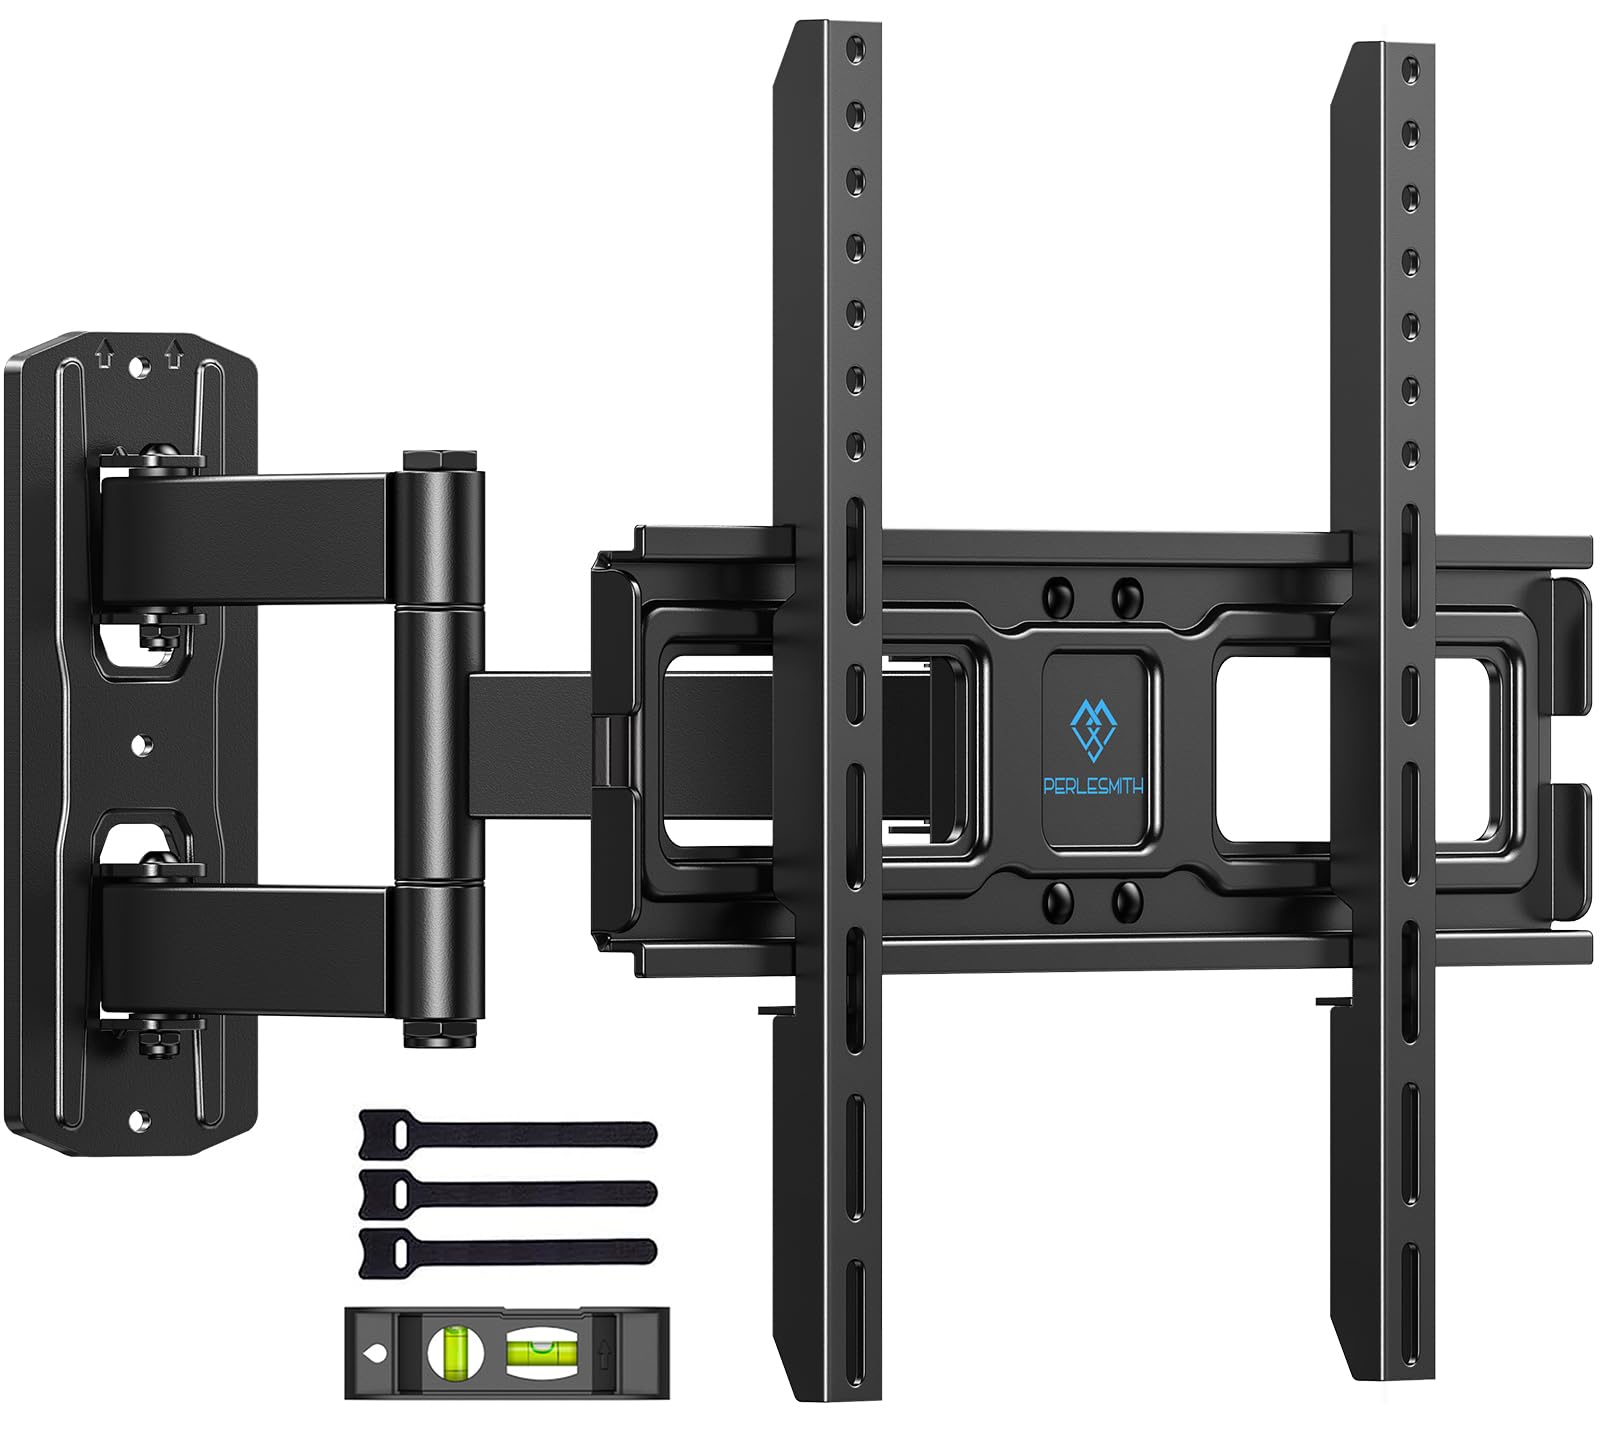 PERLESMITH TV Wall Mount for 26-55 inch TVs up to 70 lbs, Full Motion TV Mount Bracket with Swivel, Tilt, Level Adjustment, Corn